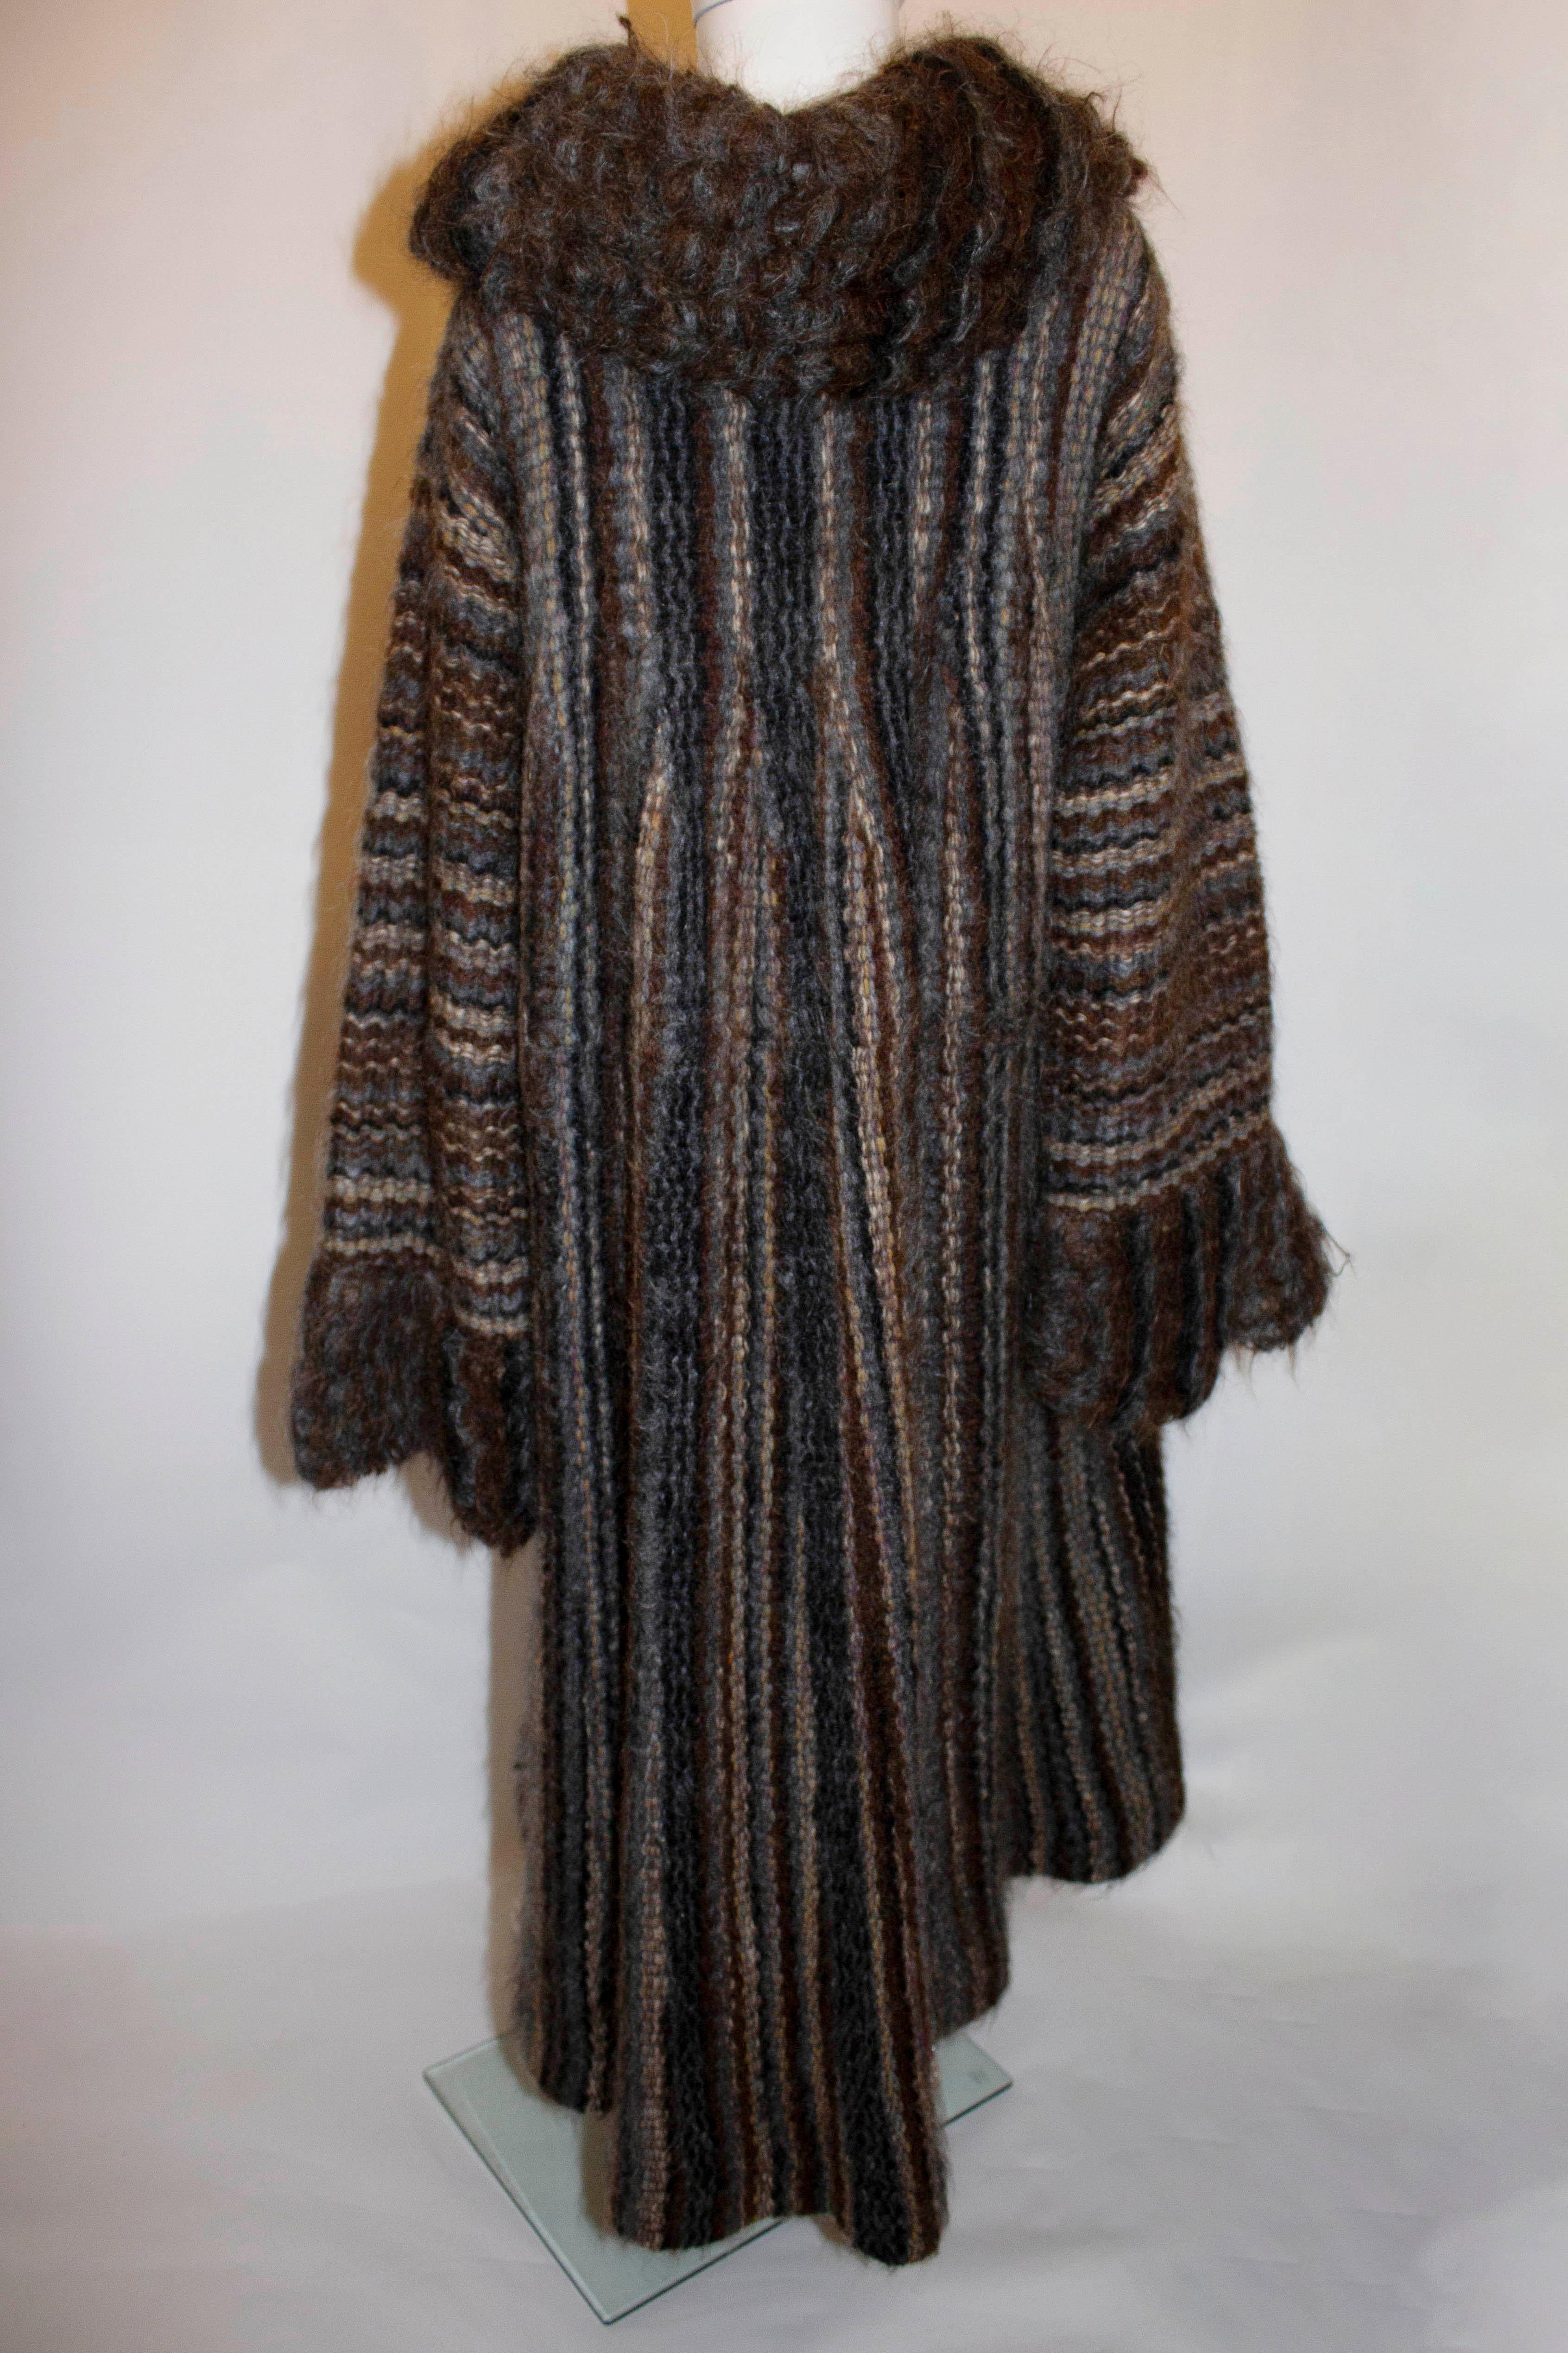 A vintage knitted coat by celebrated knitwear designer Kay Cosserat.  The coat is in a wool, mohair mix in various shades of brown, black and cream. The coat is lined and has a two button fastening with wide collar and pocket on either side.  It has